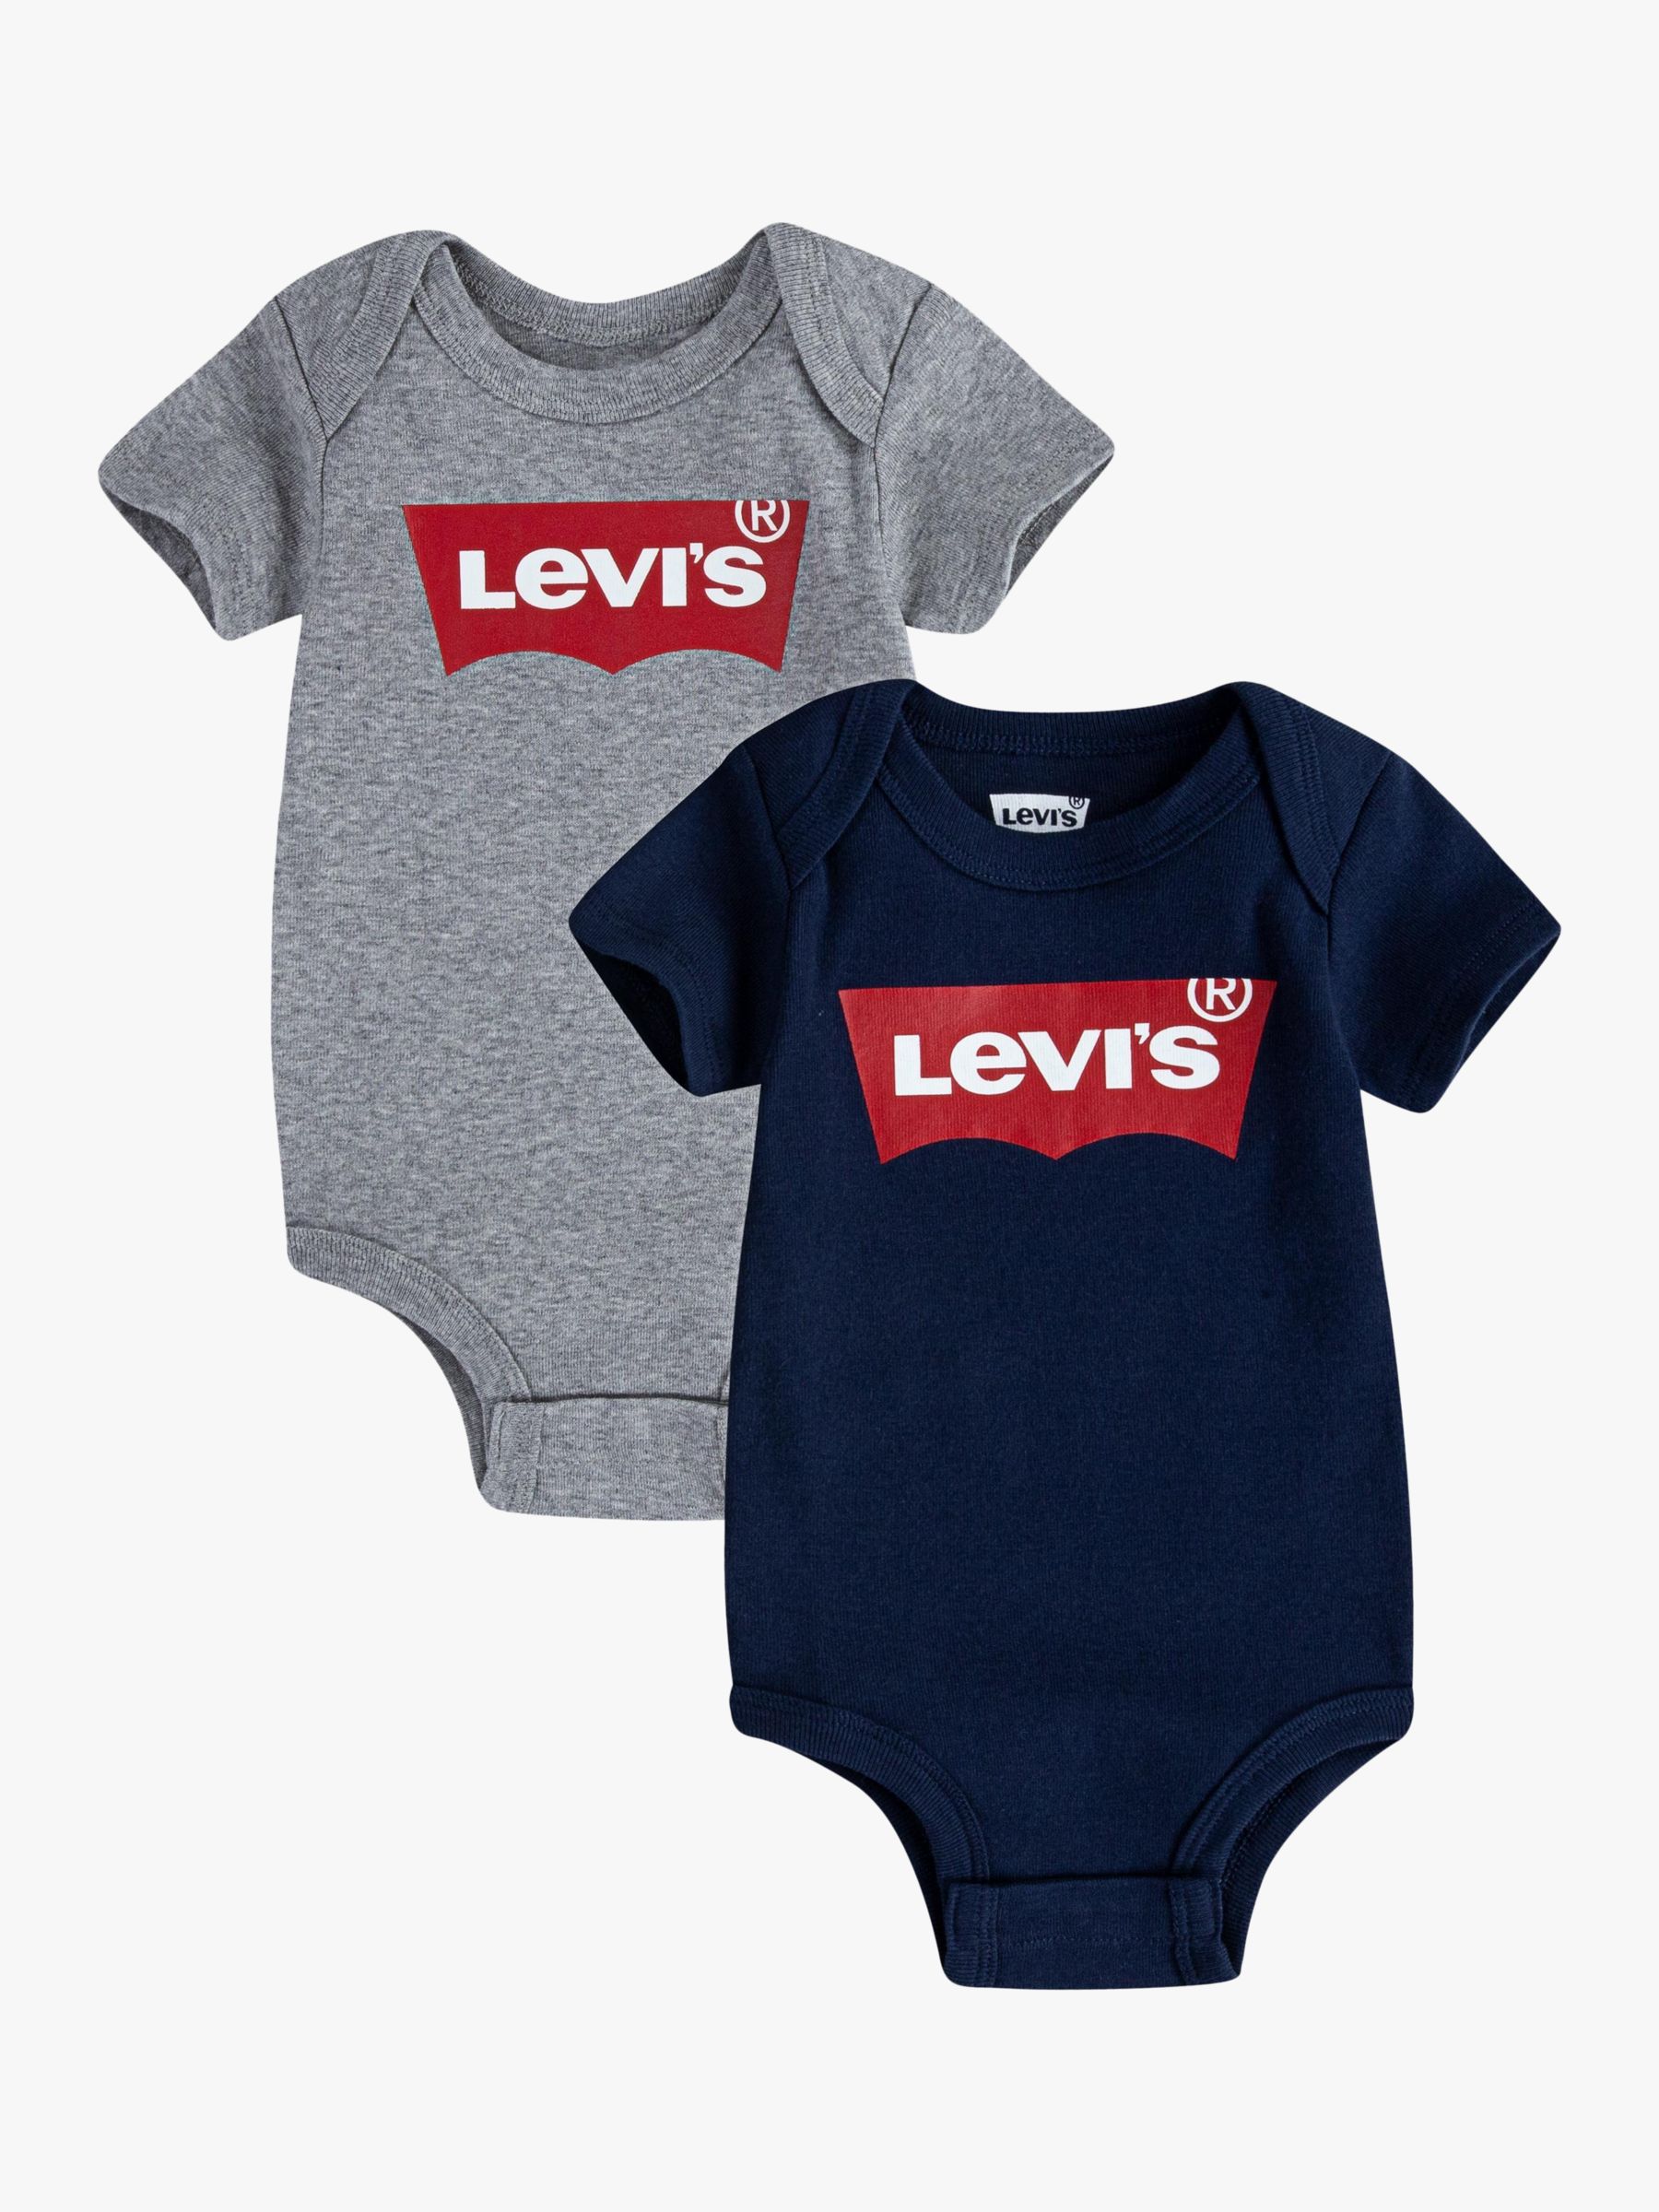 Levi's Baby Logo Bodysuits, Pack of 2